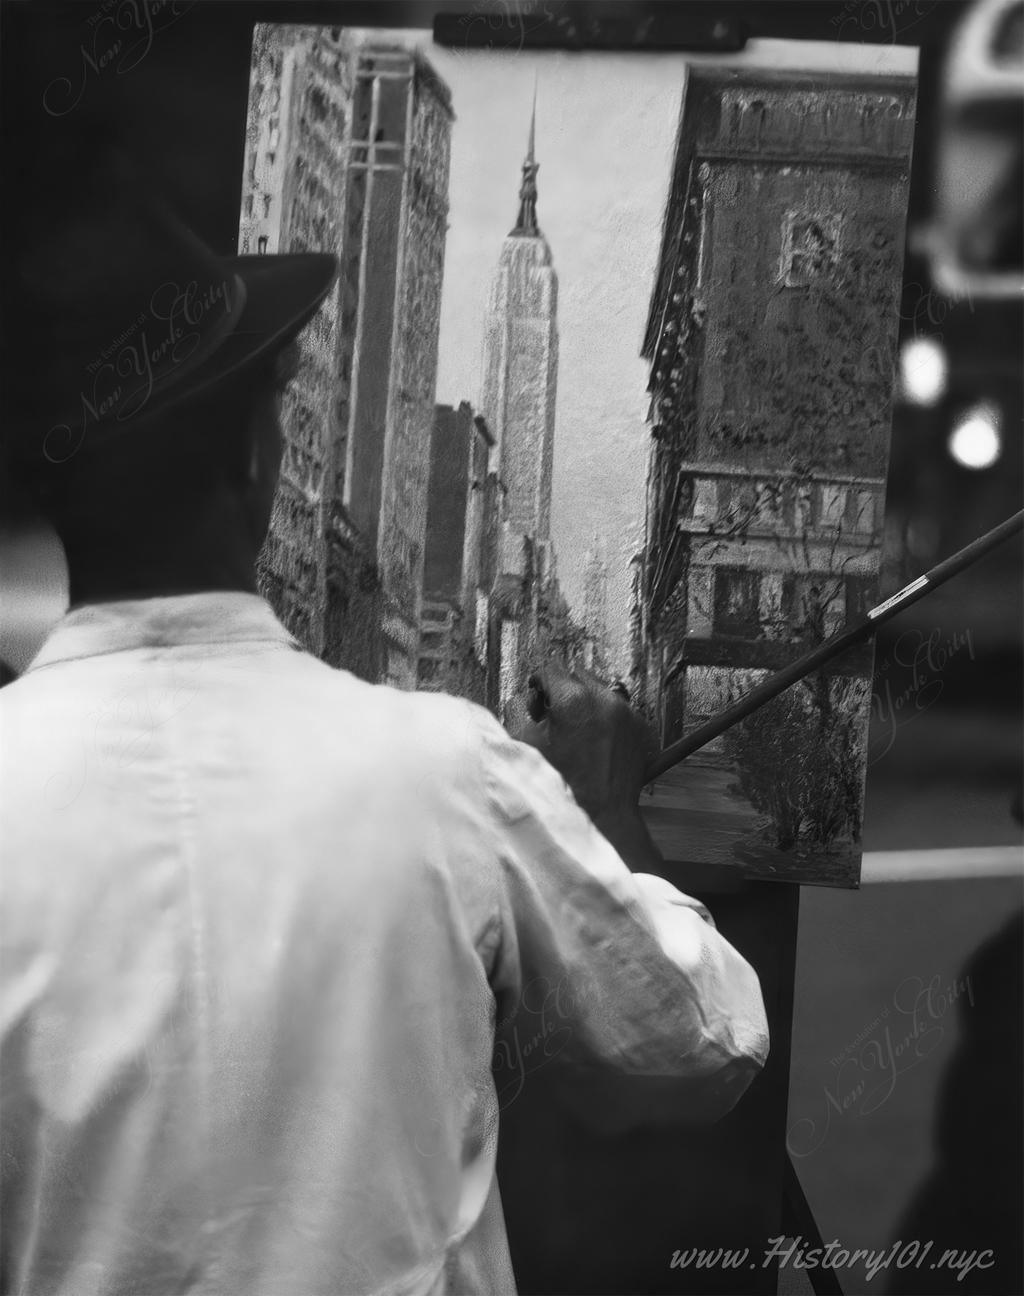 Photograph shows half-length portrait of an street artist working on a painting of Manhattan's urban landscape with the Empire State Building in the background.